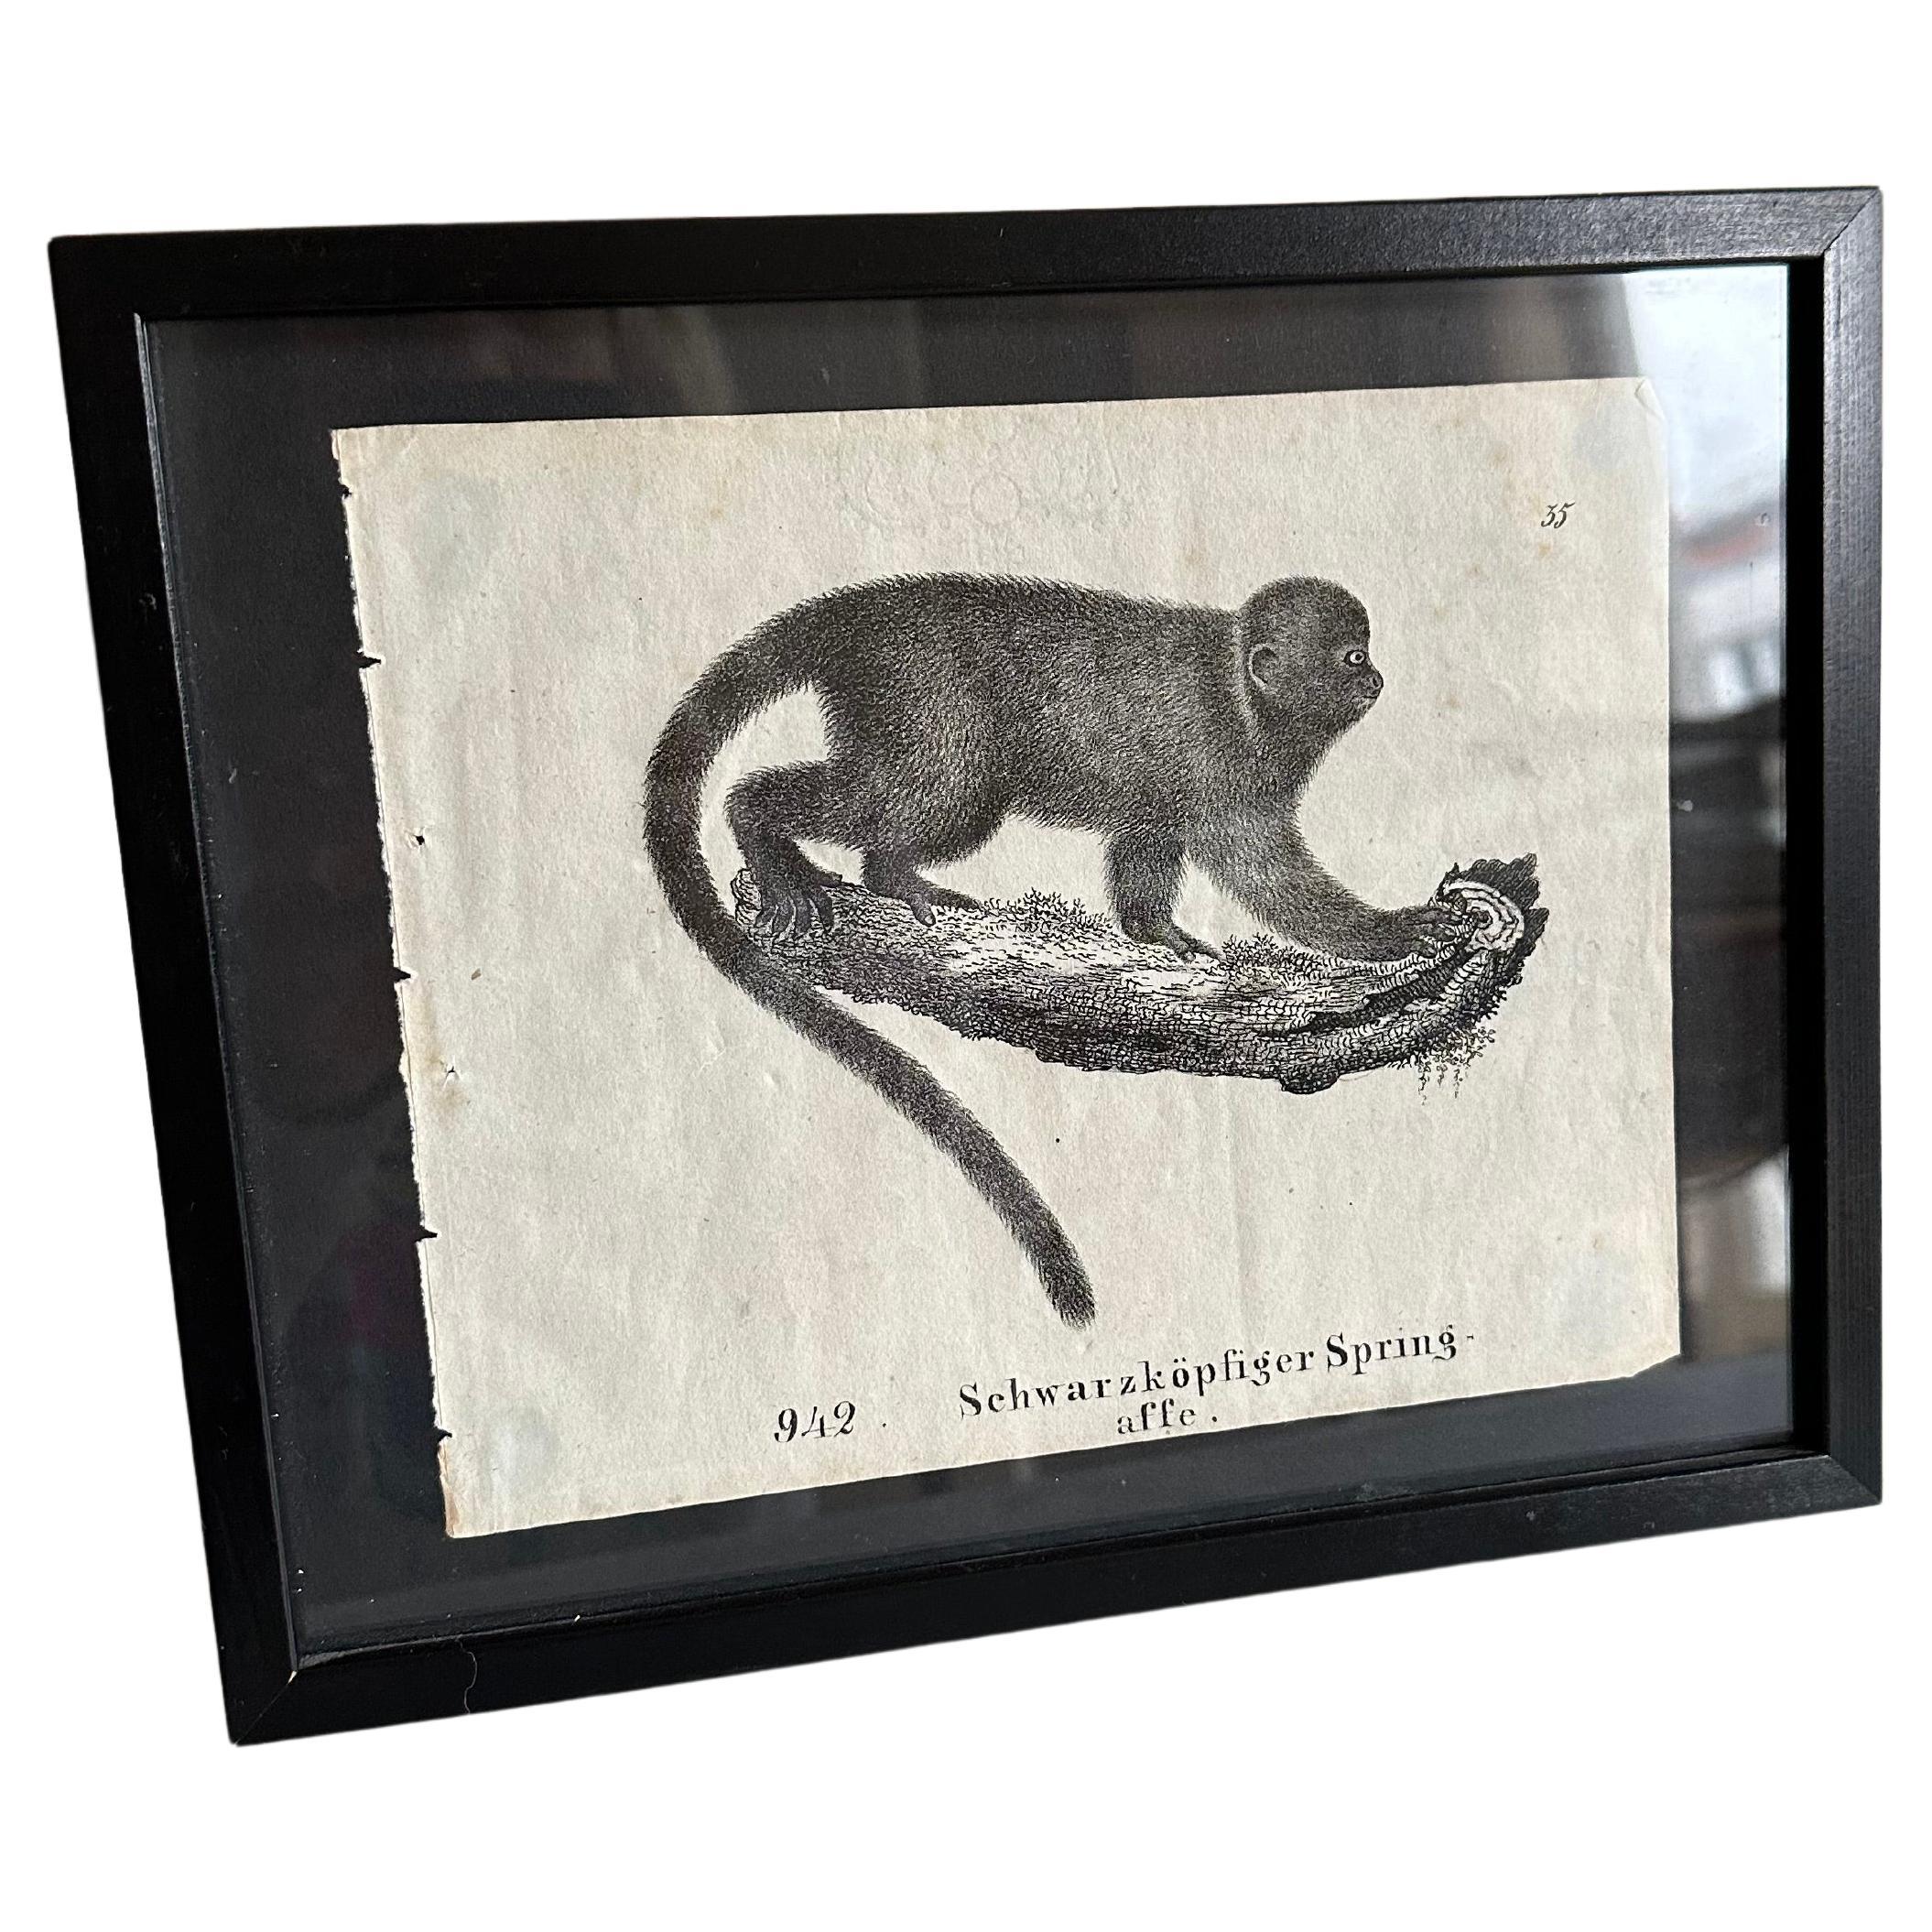 Zoological Original Lithograph Featuring a Monkey from 1831-35 For Sale